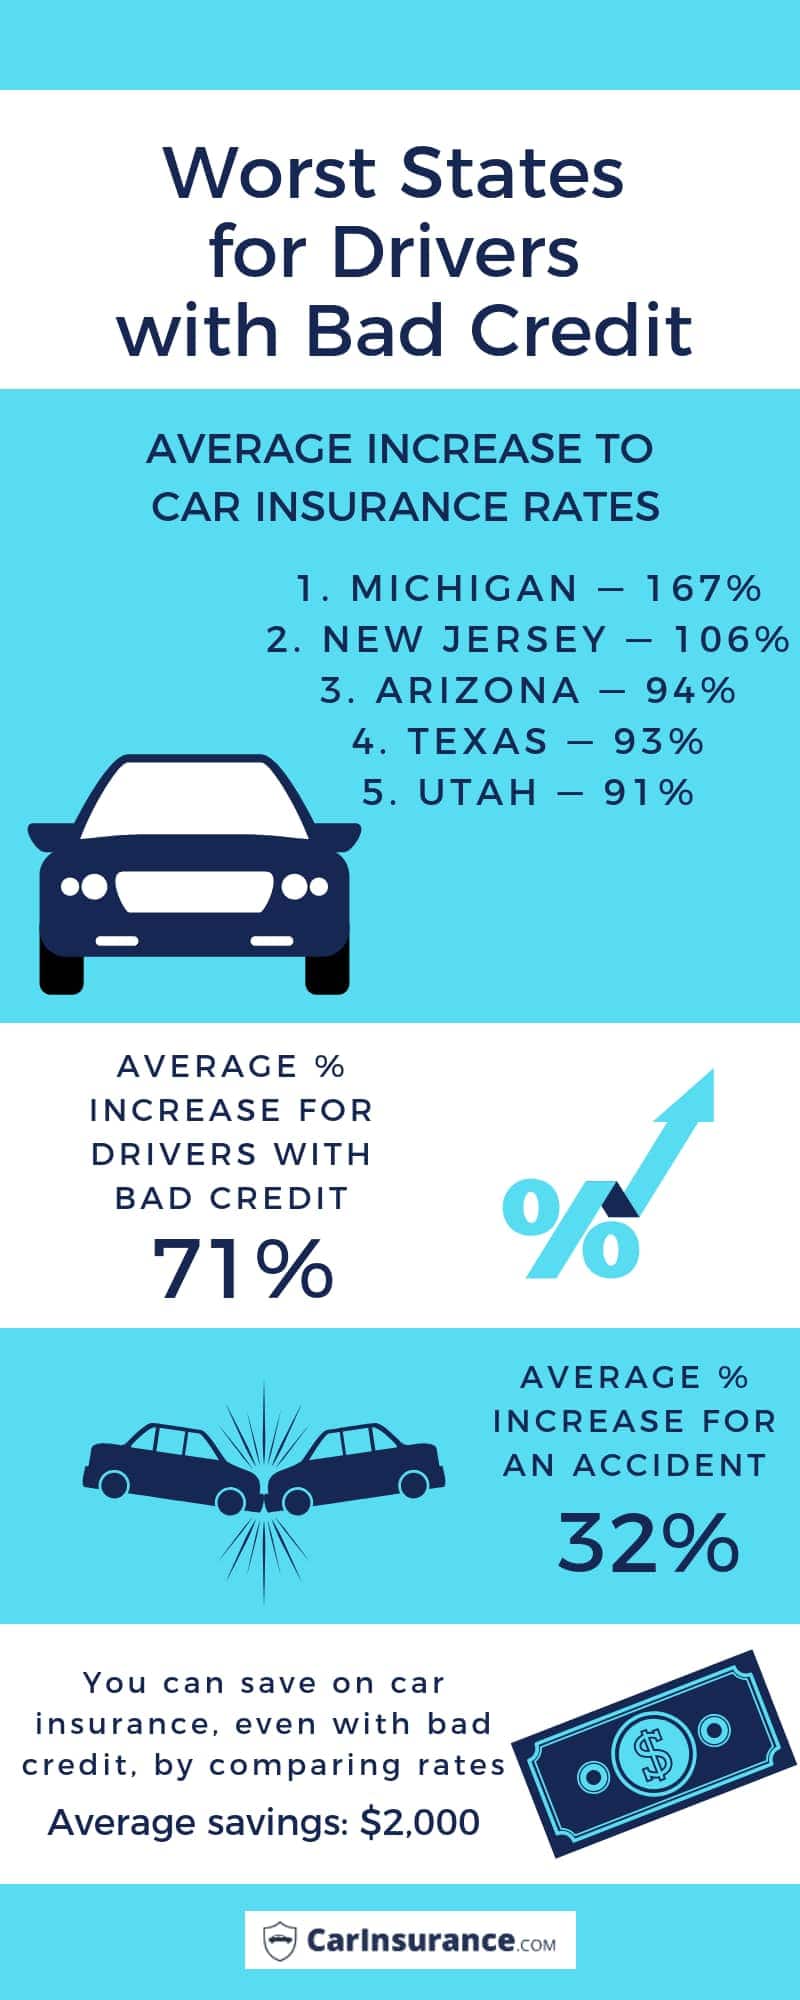 Worst states for drivers with bad credit, key data points